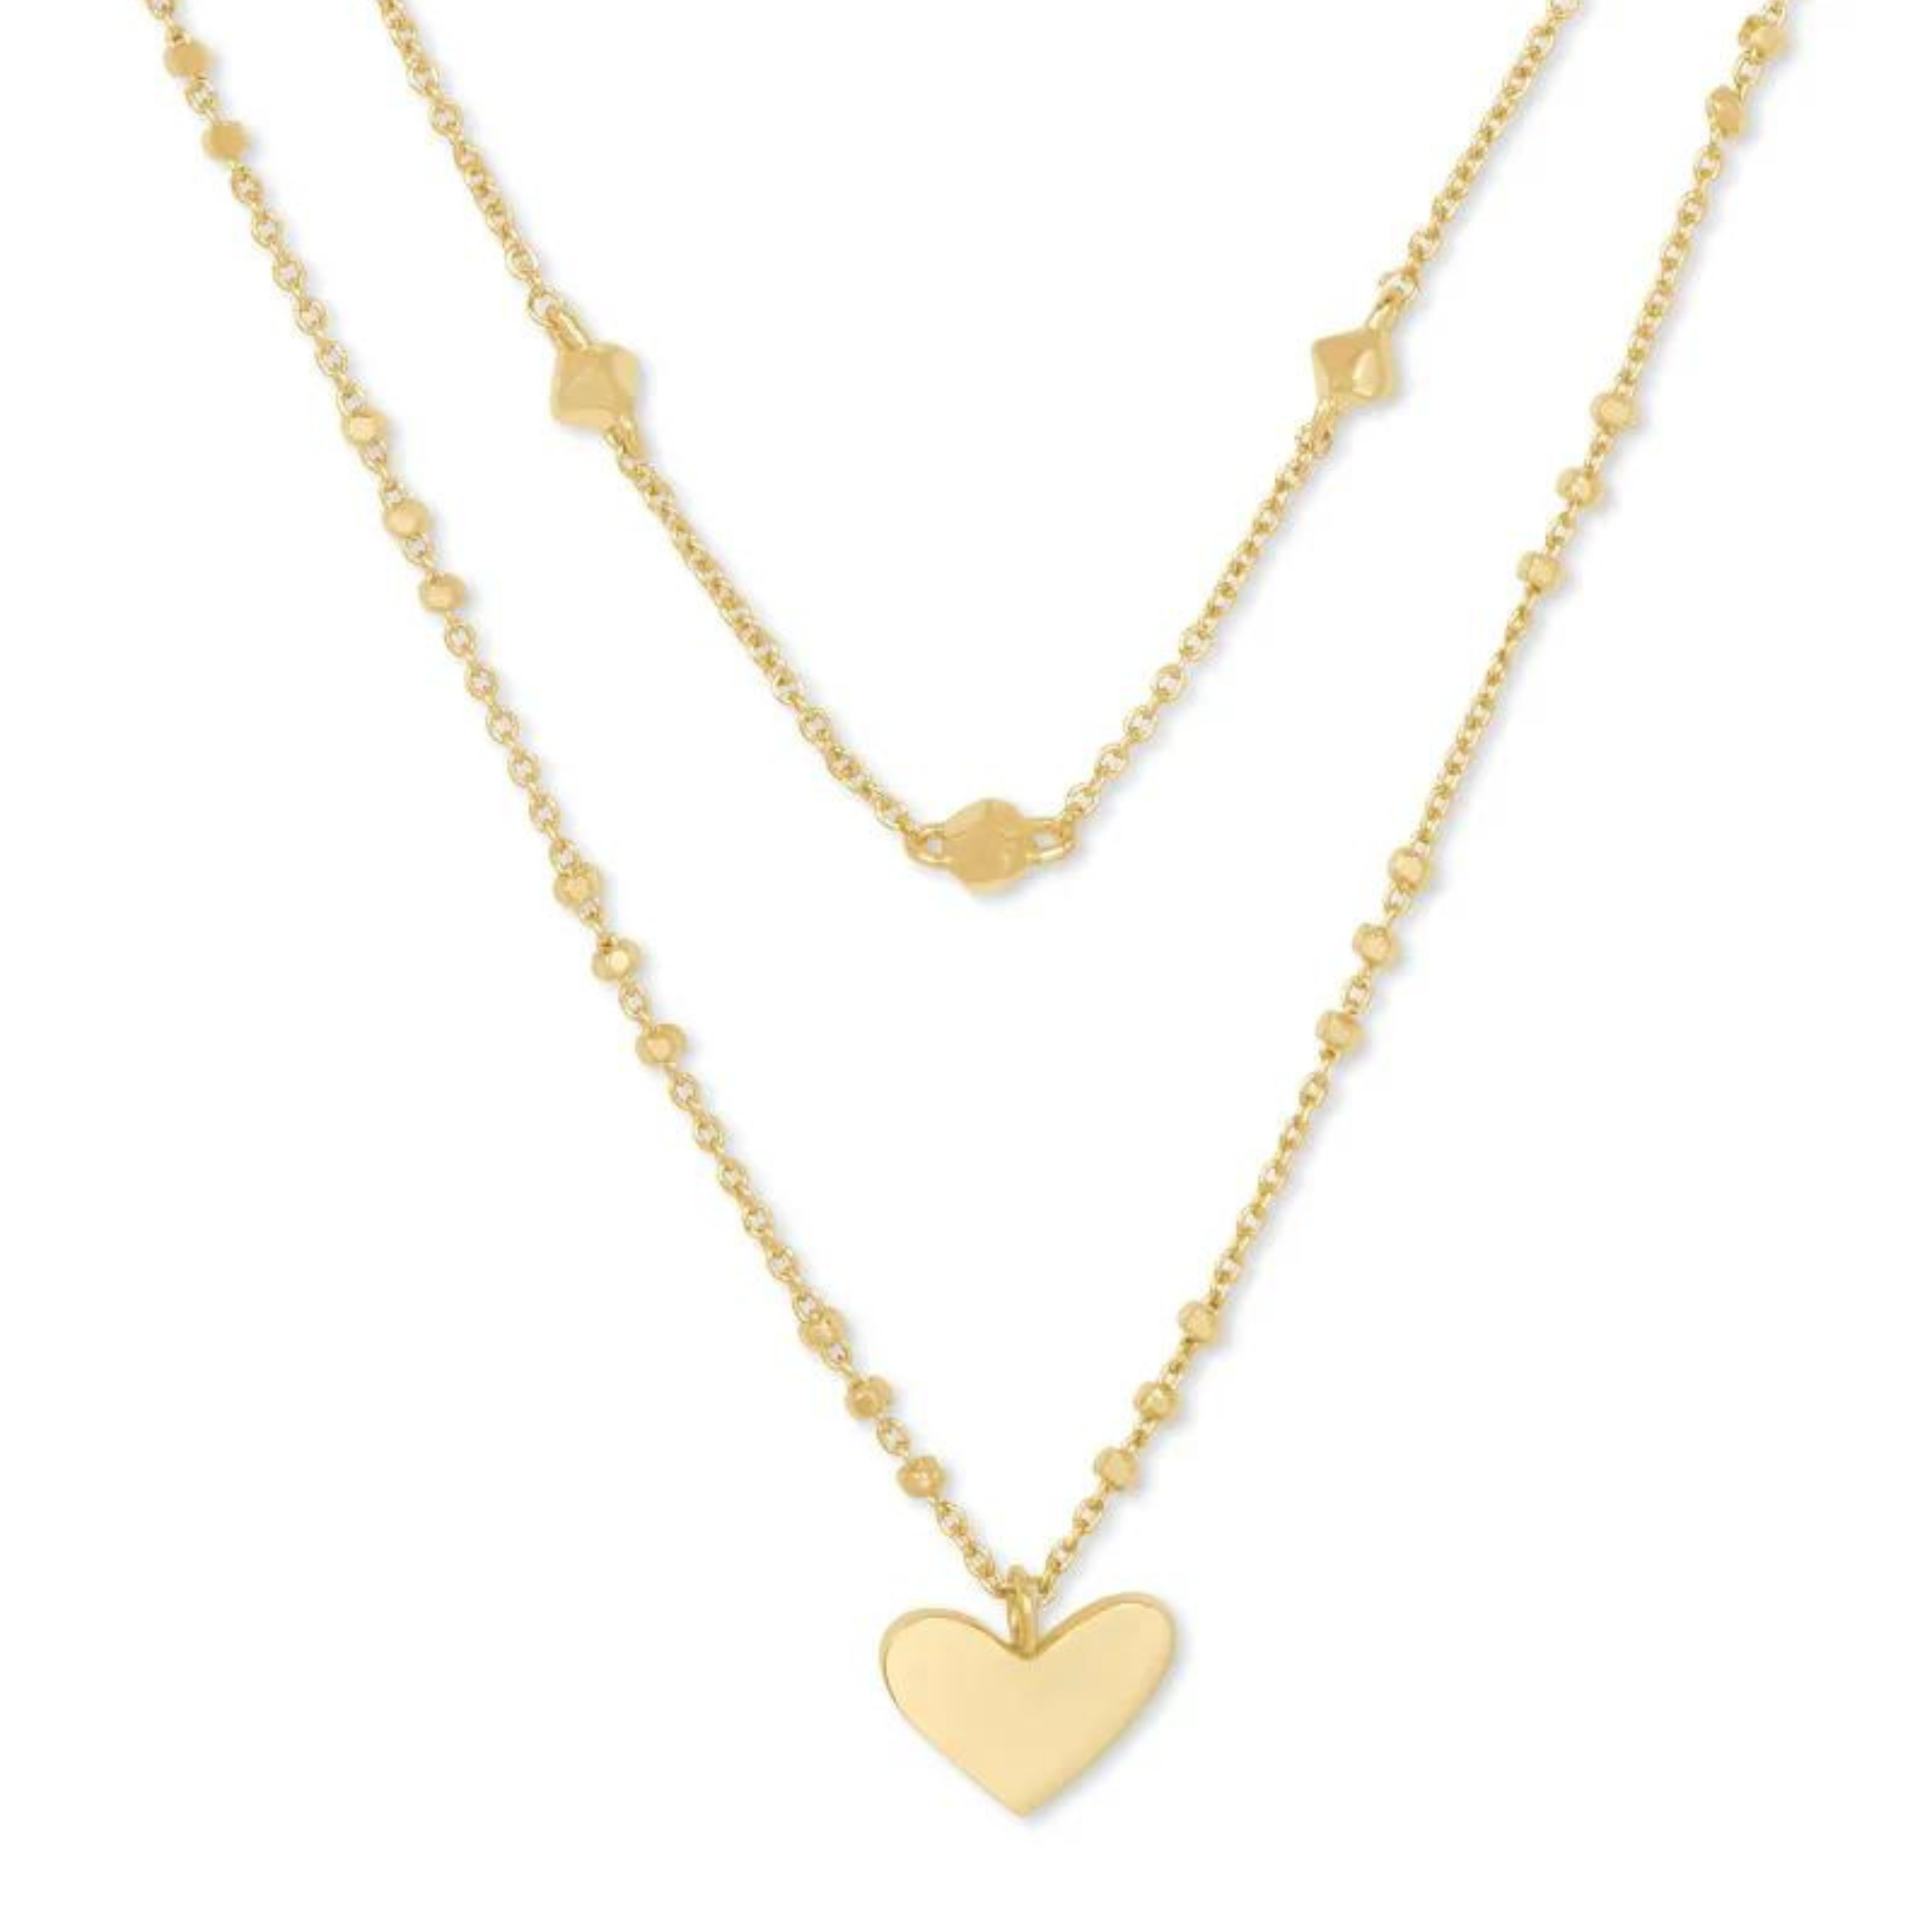 Multi strand gold heart neckalce pictured on a white background.